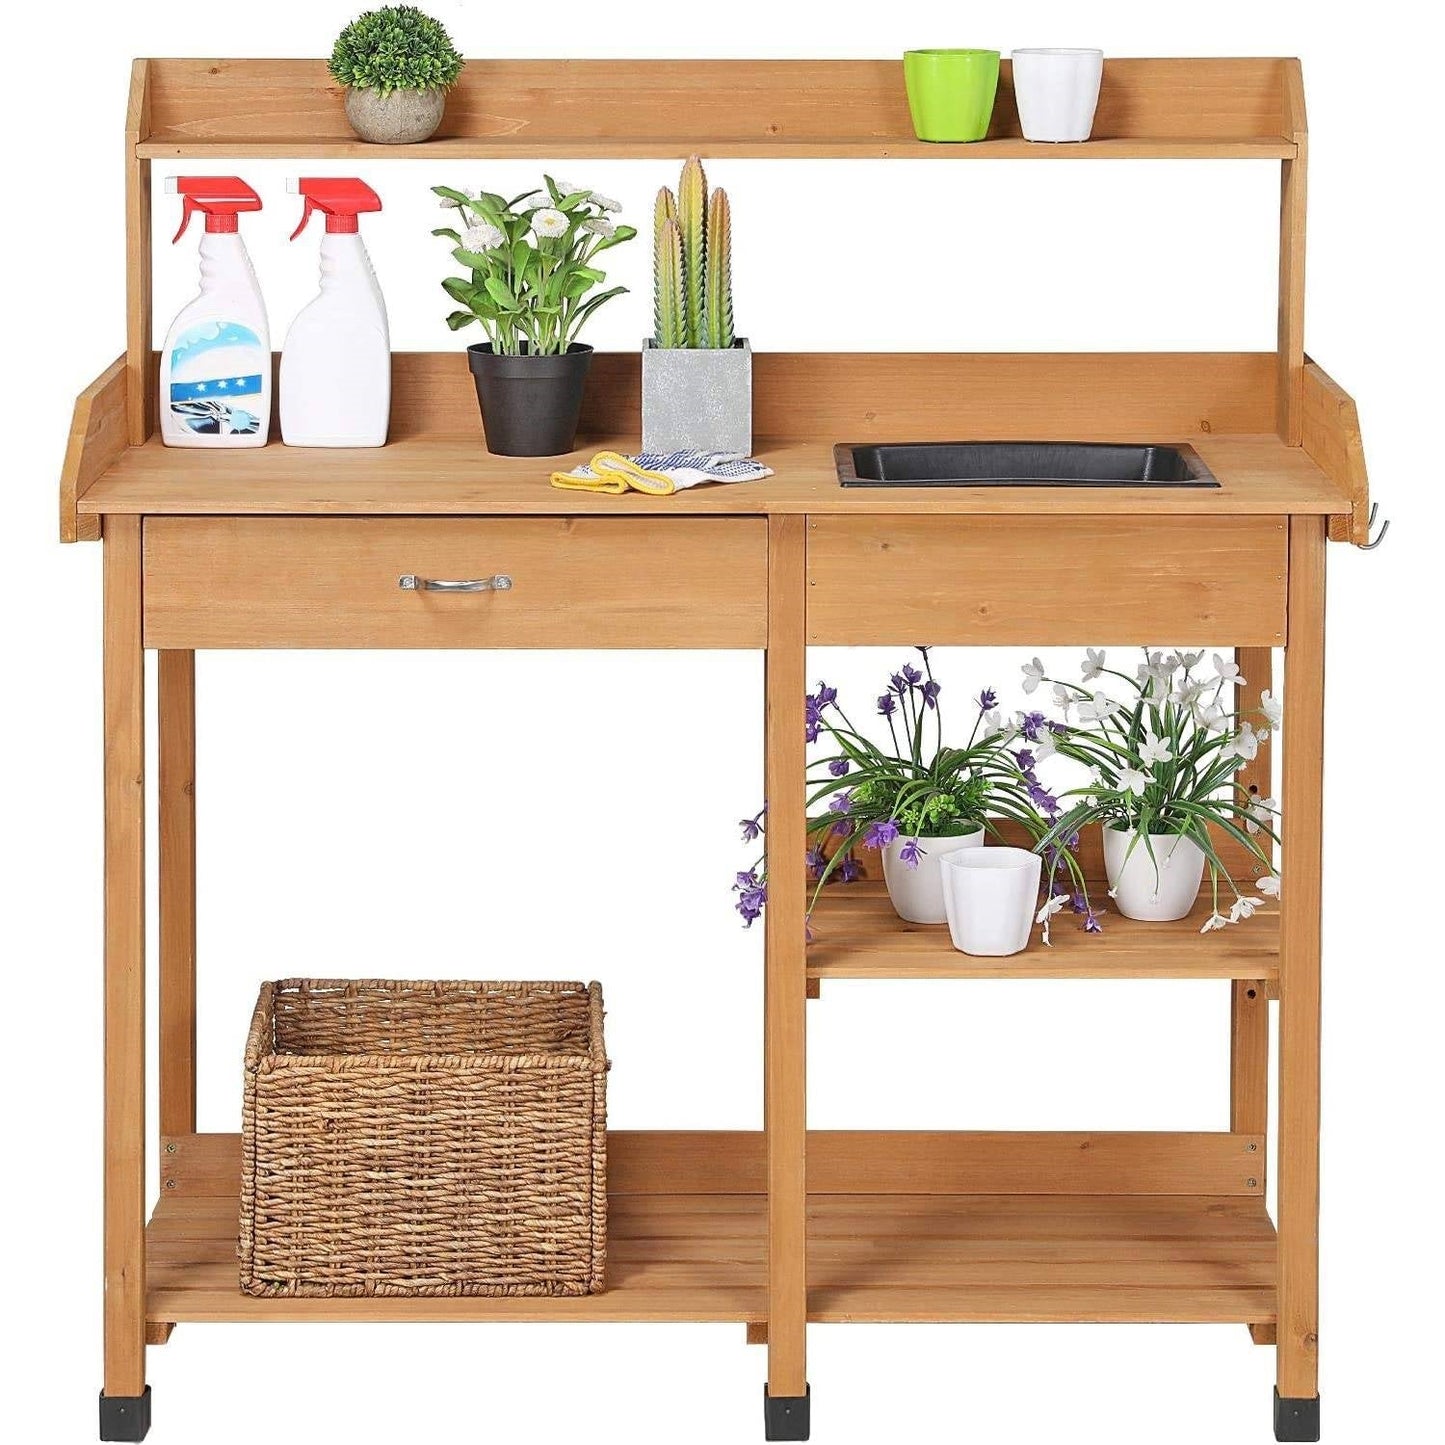 Outdoor > Gardening > Potting Benches - Outdoor Garden Wood Potting Bench Work Table With Sink In Light Oak Finish